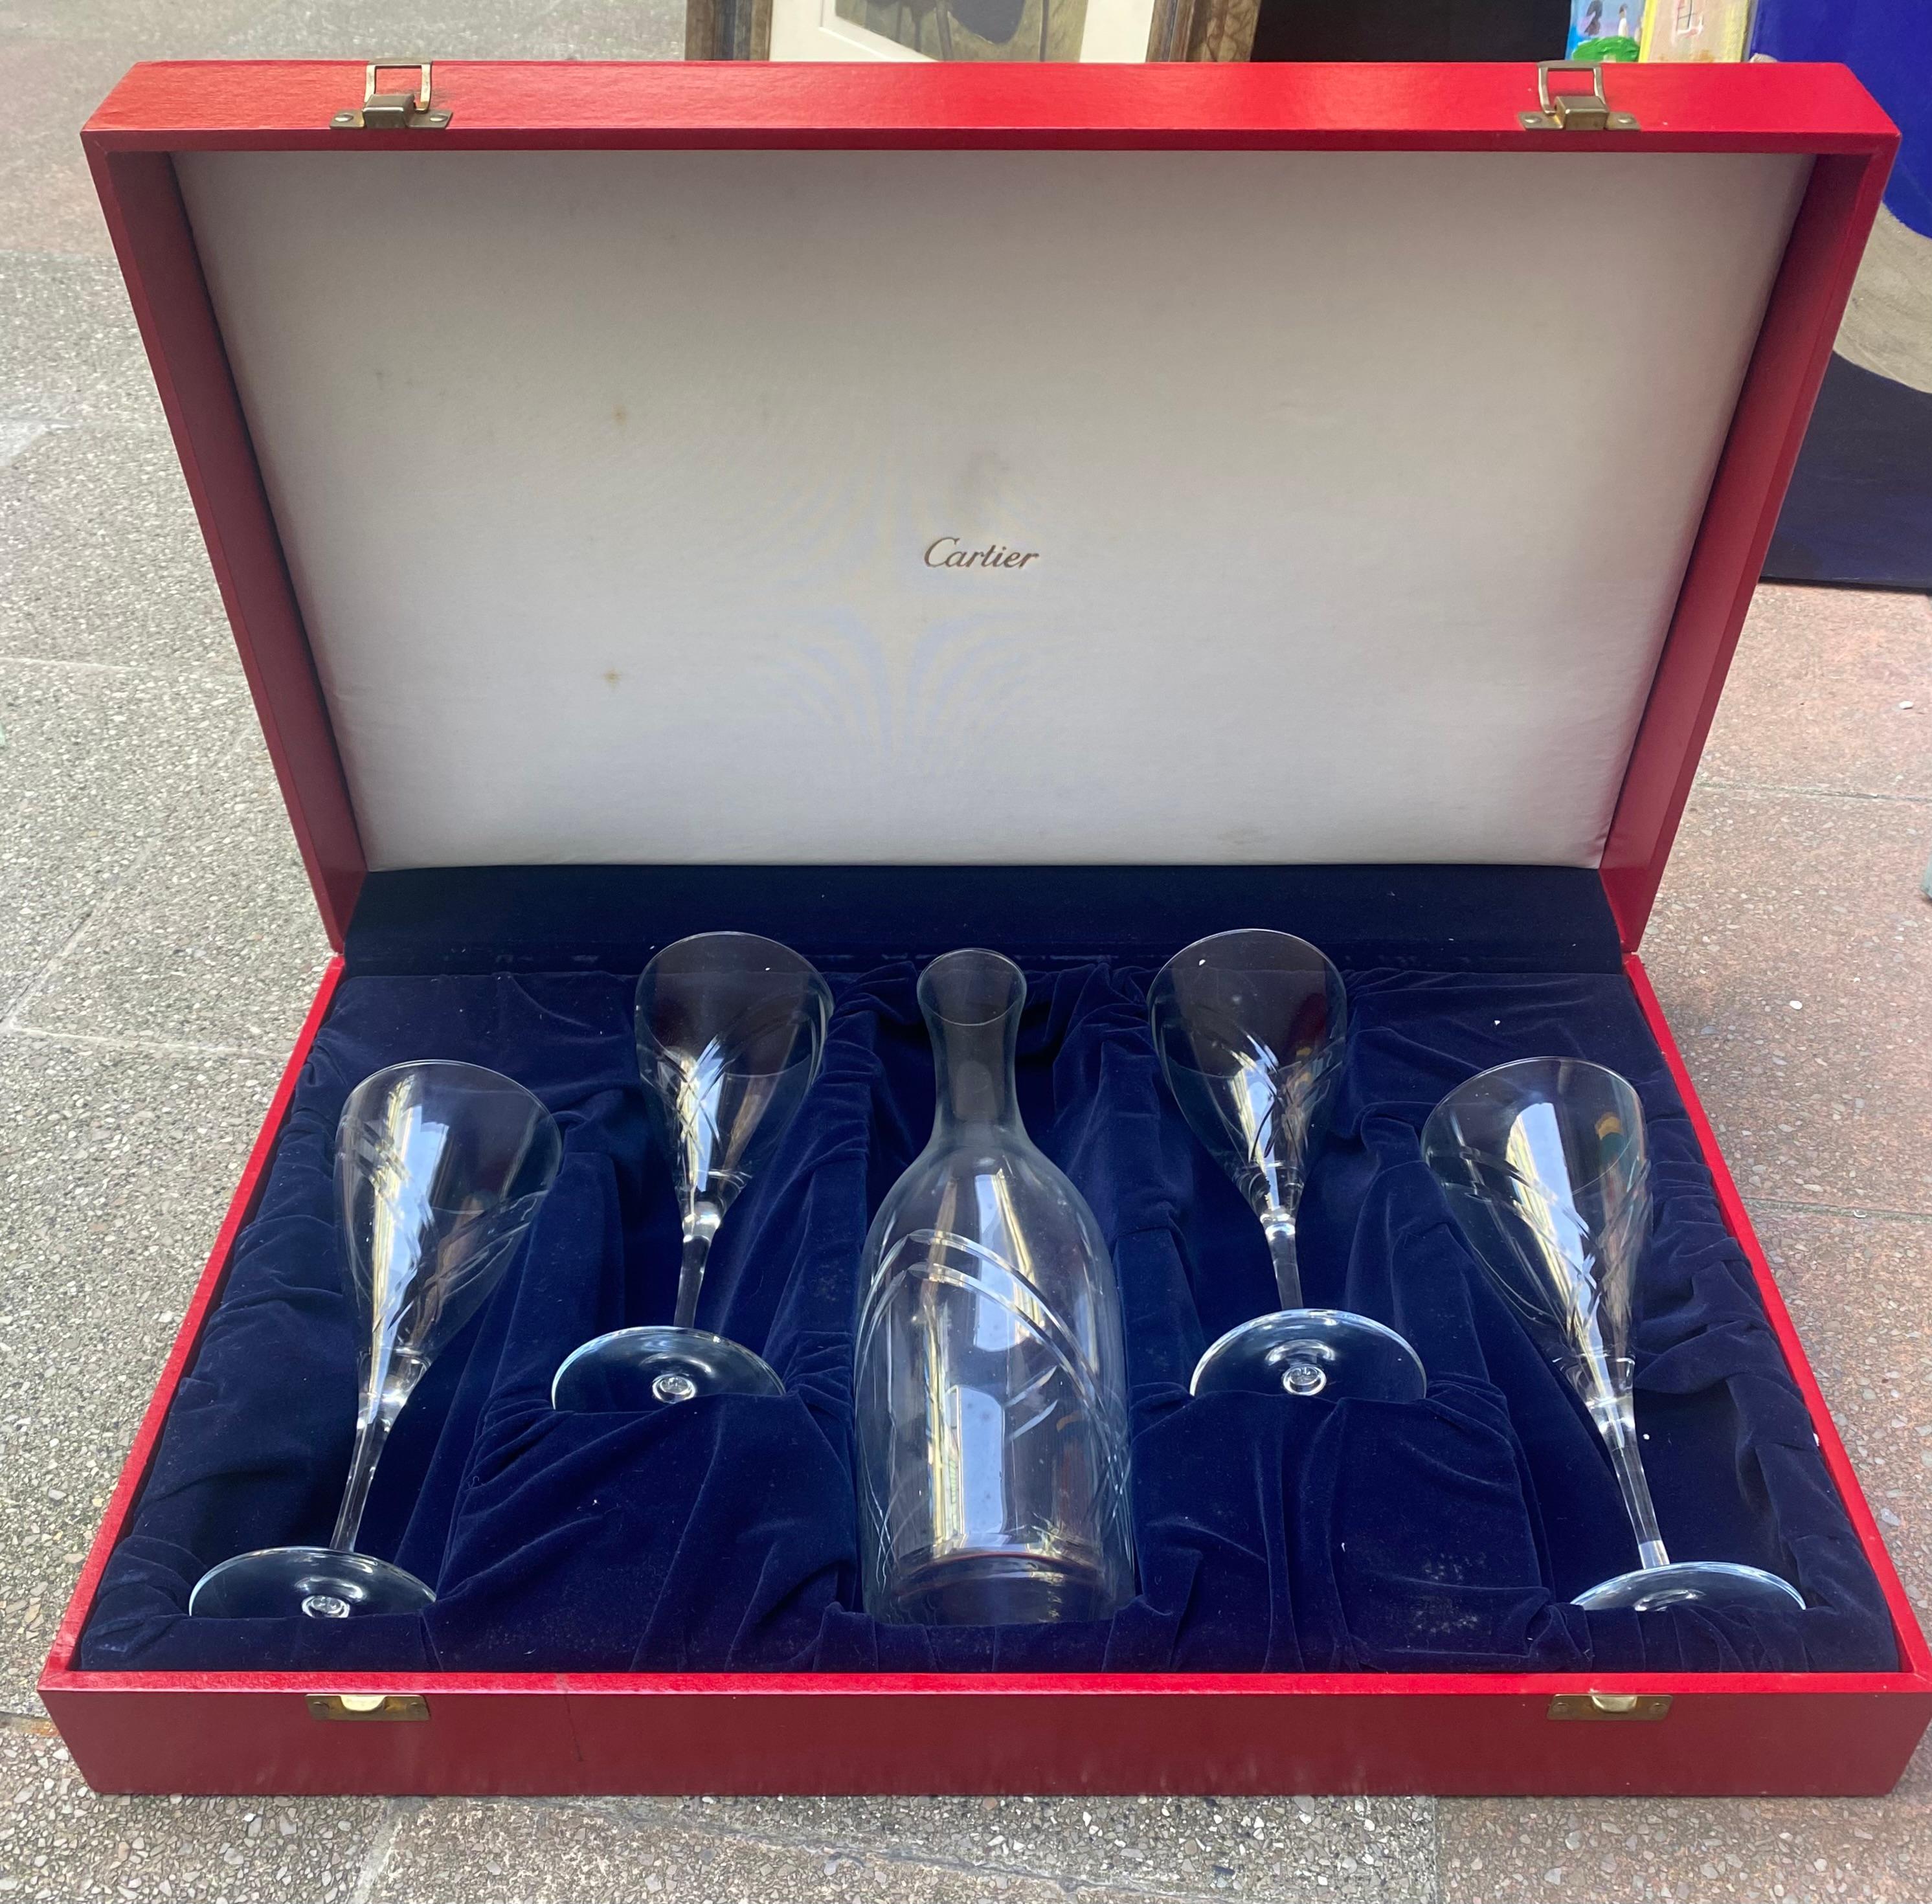 Cartier box consisting of 4 water glasses and a crystal water carafe - 1960s
Cartier red and velvet emblematic box
Composed of 4 glasses and 1 carafe
Decanter signed Cartier
Dimensions: l 53 x d 34 x h11cm
1960
In very good condition.